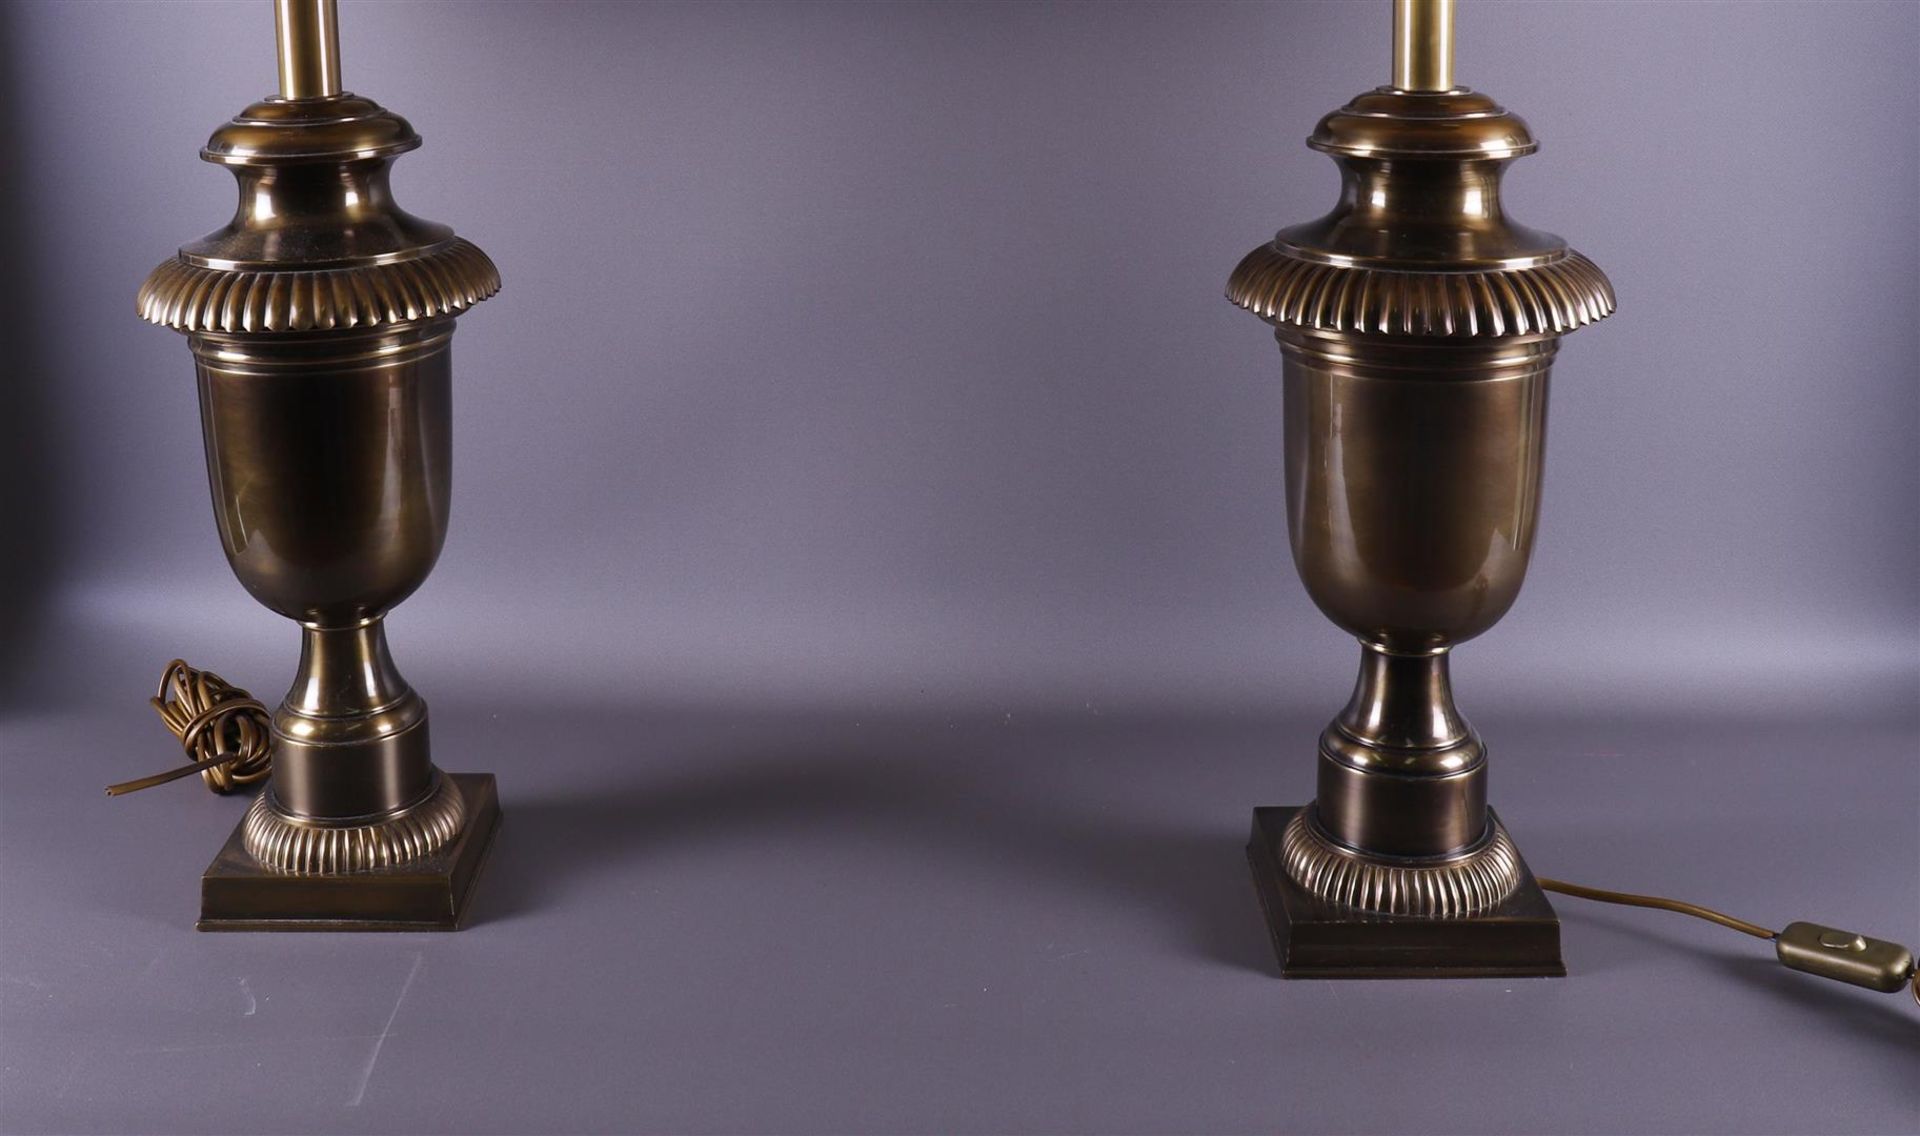 A pair of baluster-shaped bronze lamp bases with fabric lampshades, 20th century - Bild 2 aus 2